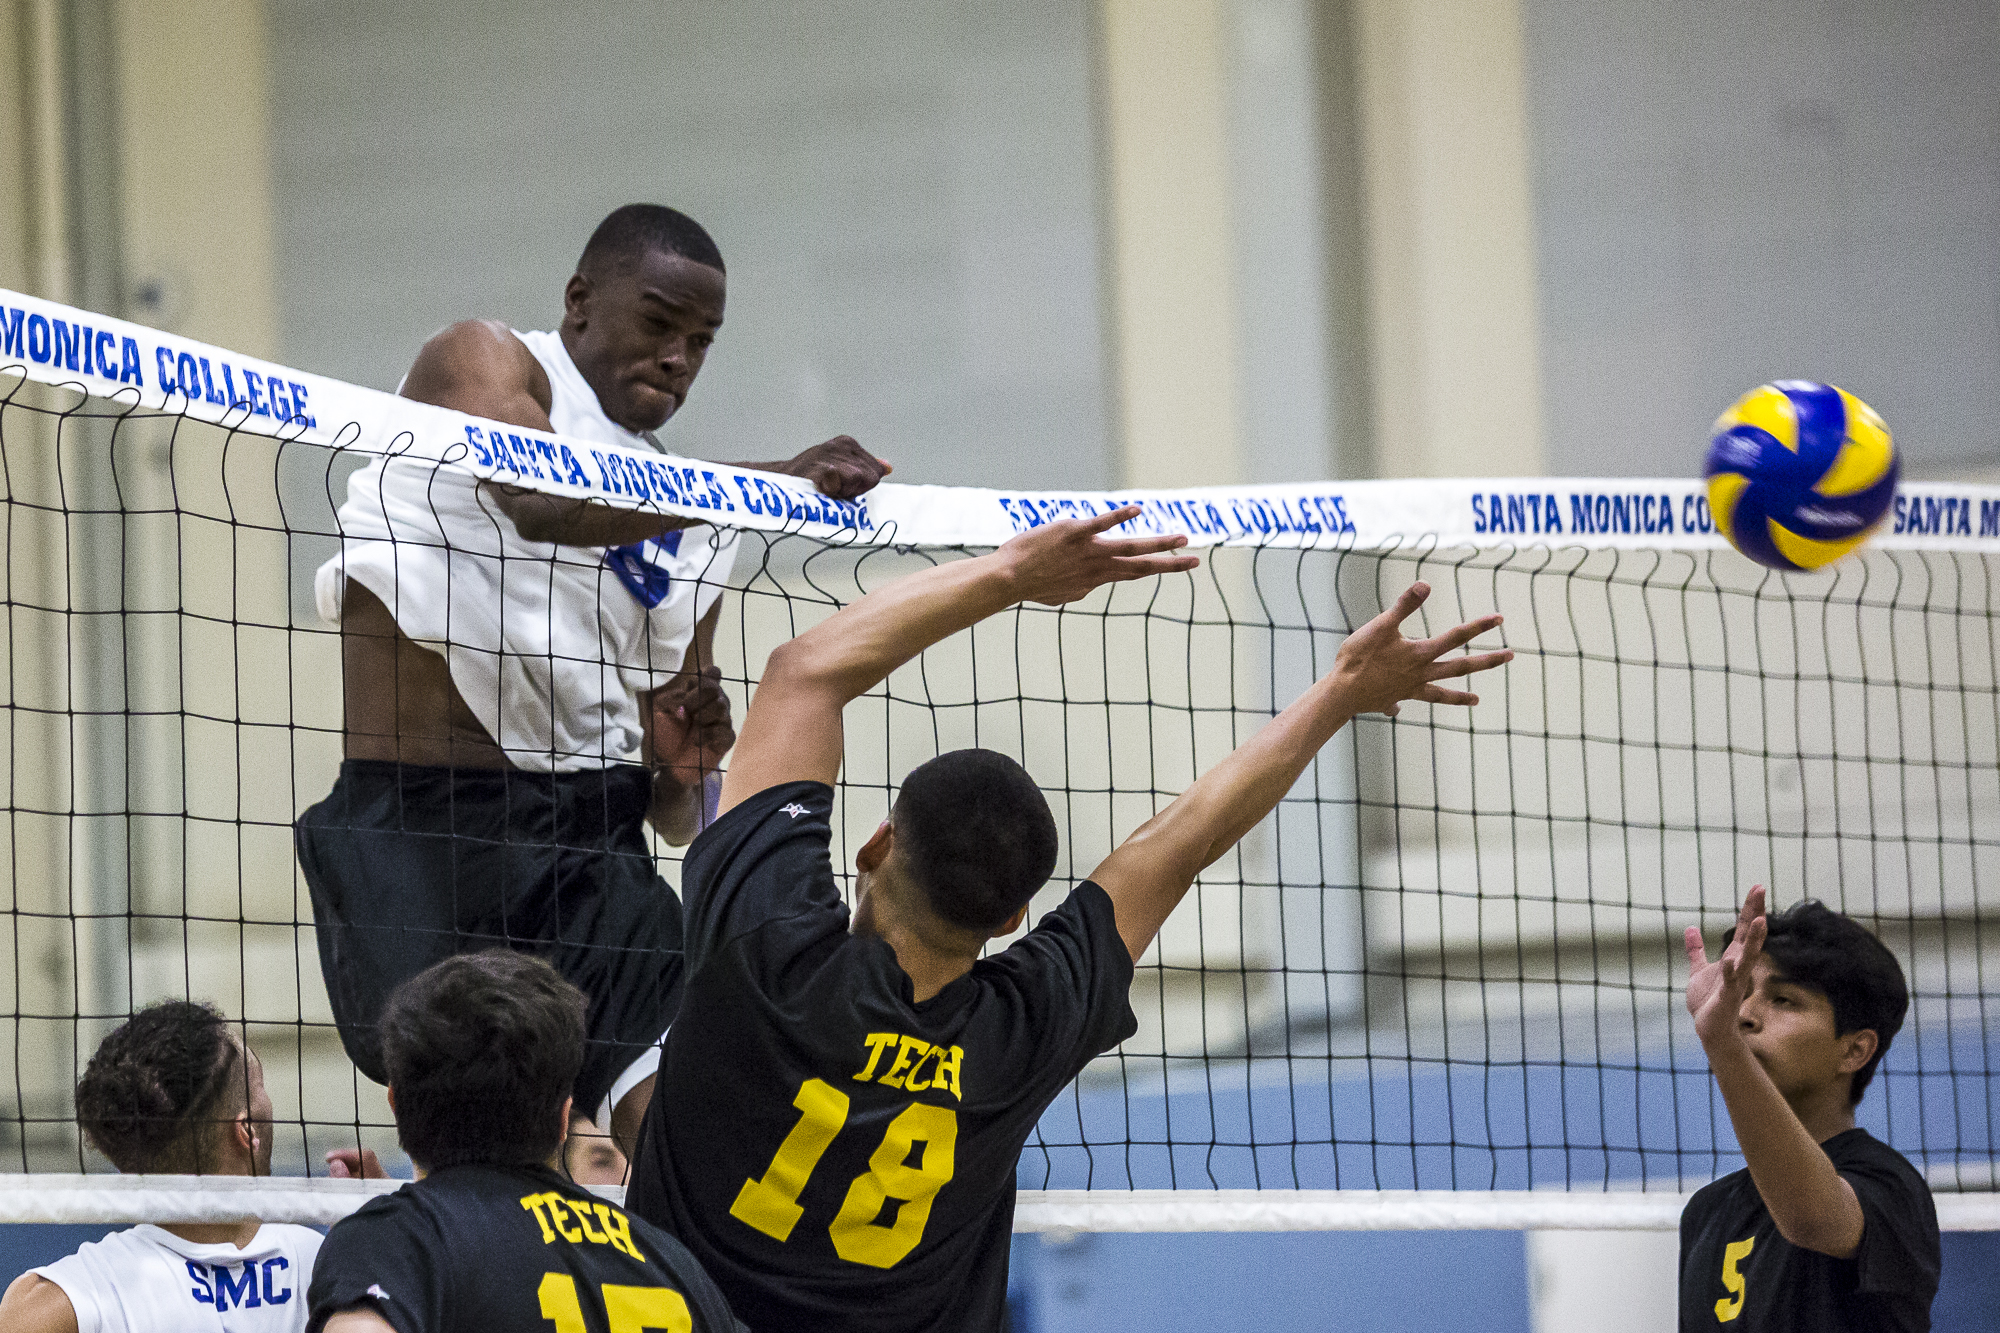  Santa Monica College Corsair middle-hitter Vecas Lewin #15 (left, white) nails a very powerful spike into the Los Angeles Trade Tech Beaver defense during the Corsairs 3-0 blowout victory against the Tech Beavers in the Santa Monica College (SMC) Pa